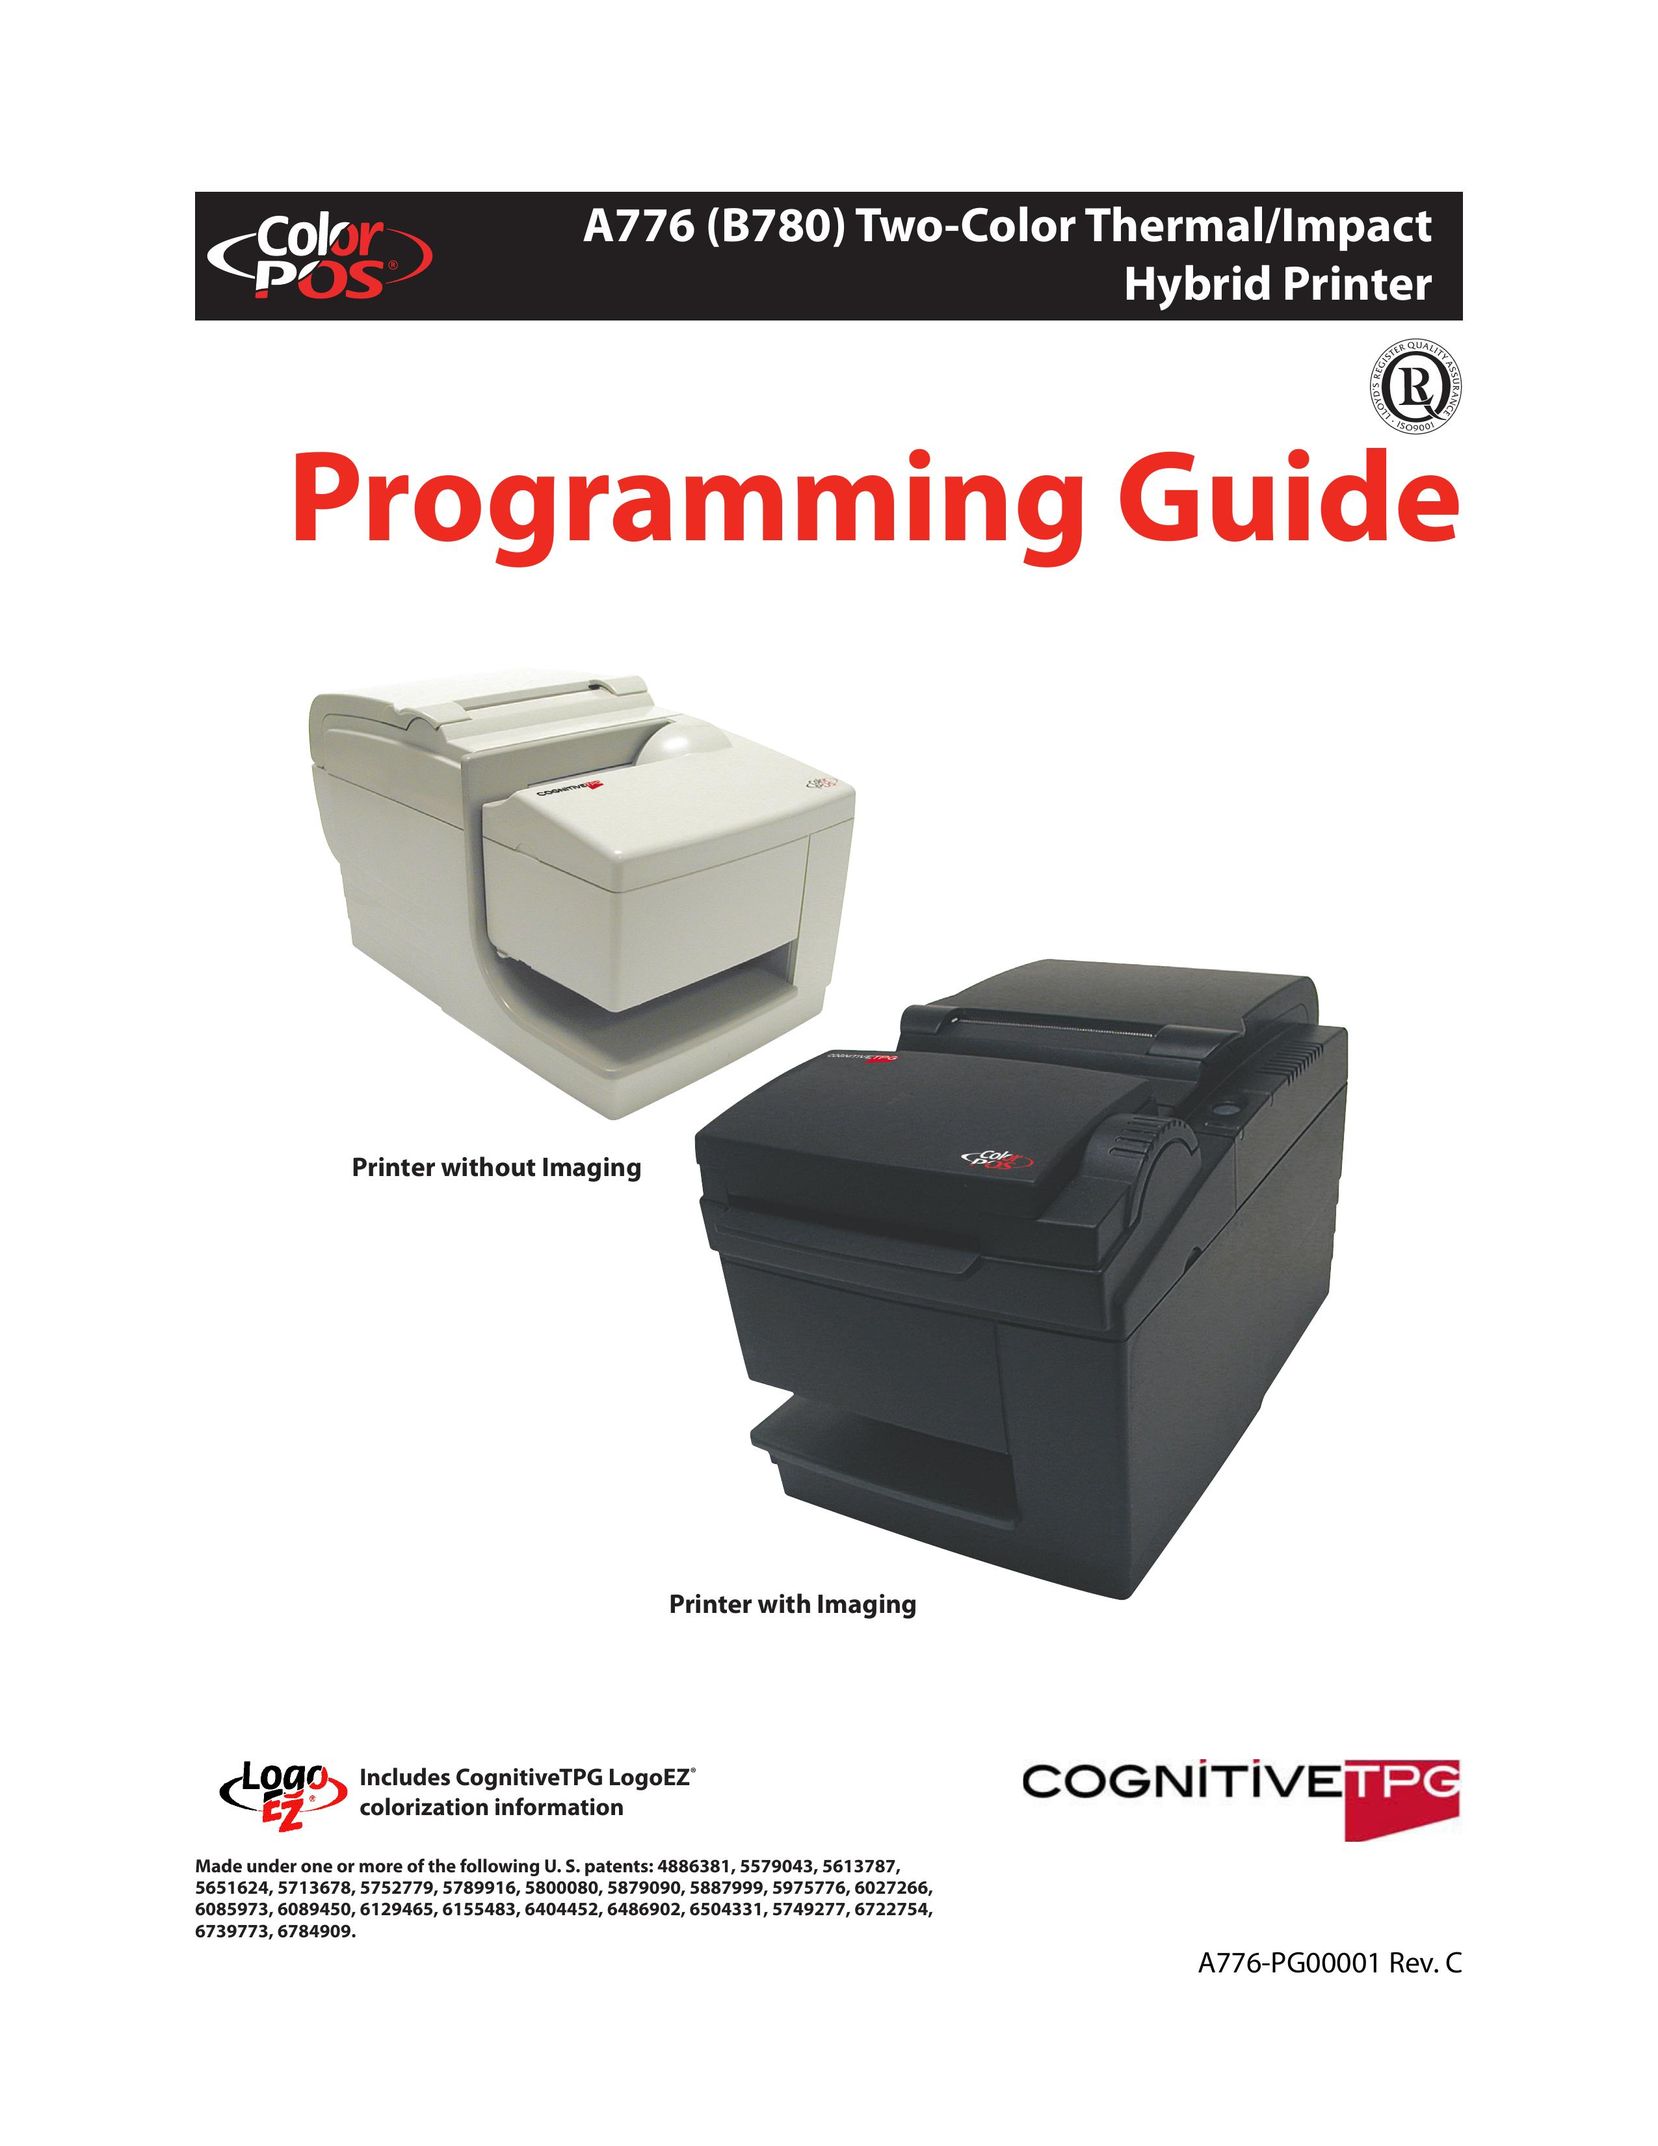 Cognitive Solutions A776 All in One Printer User Manual